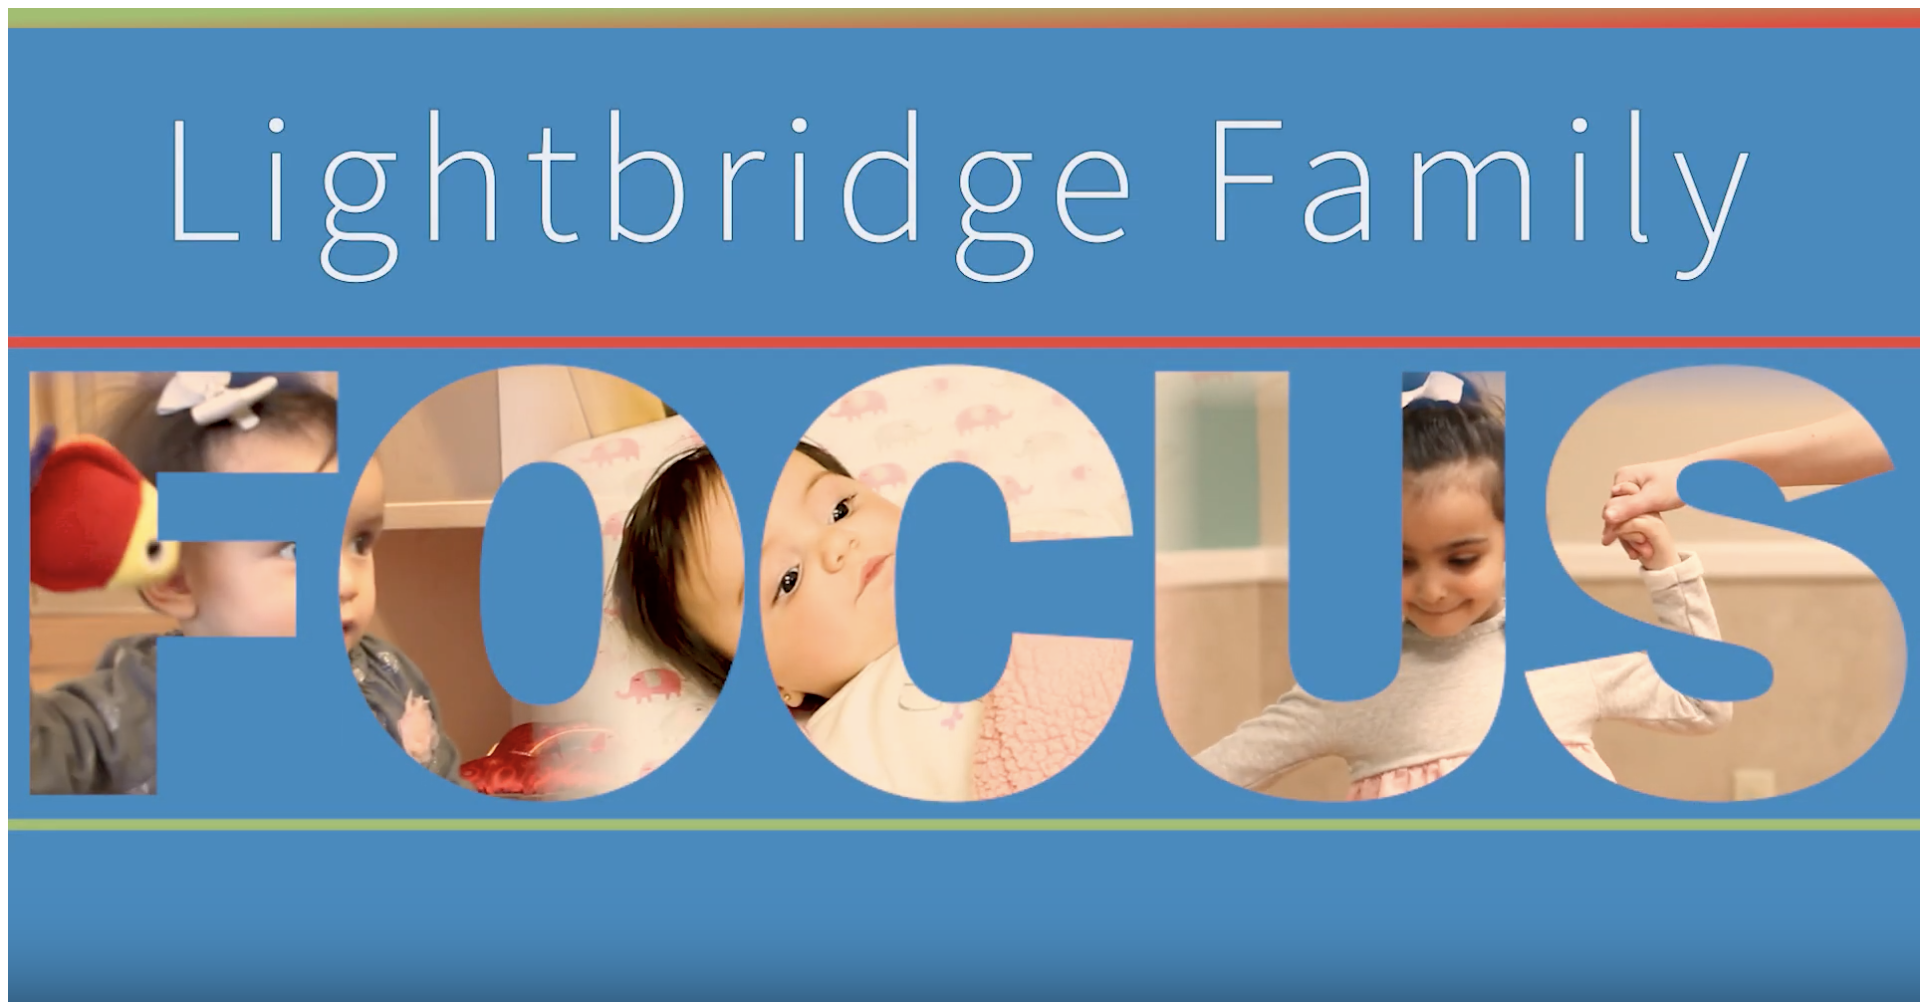 Lightbridge Family Focus - How to Answer Questions From Children - Blog